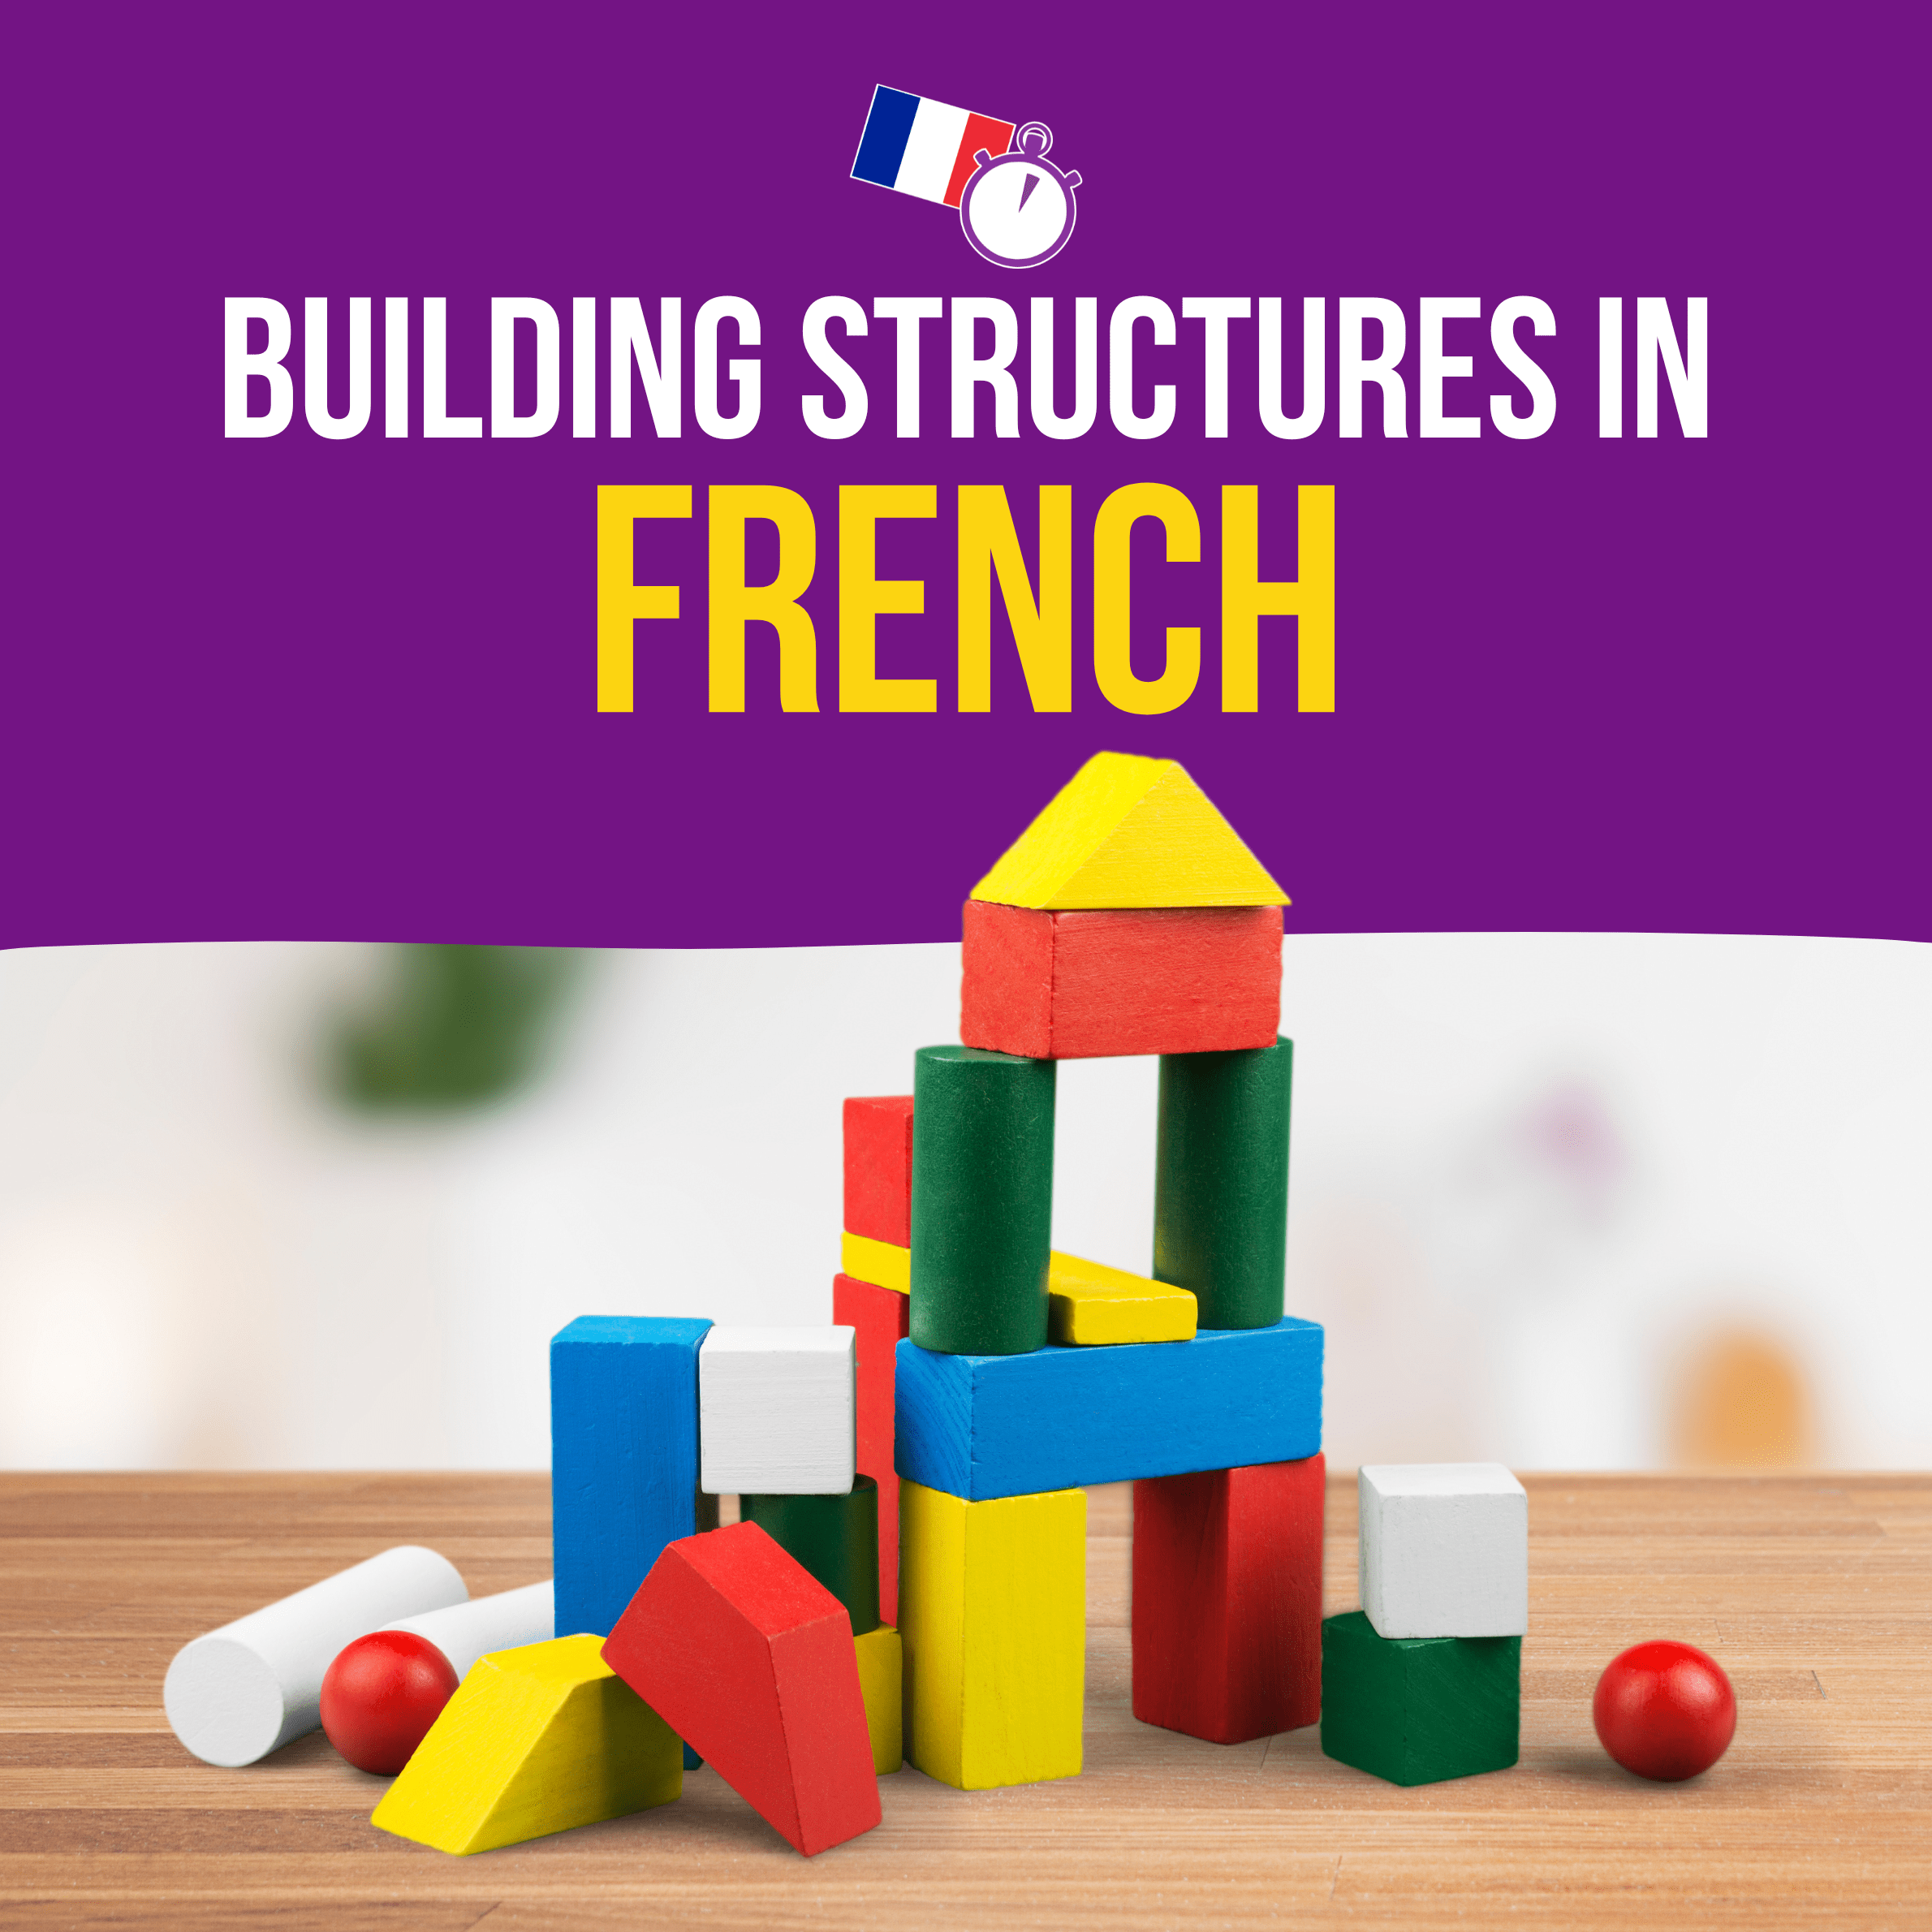 Building Structures in French